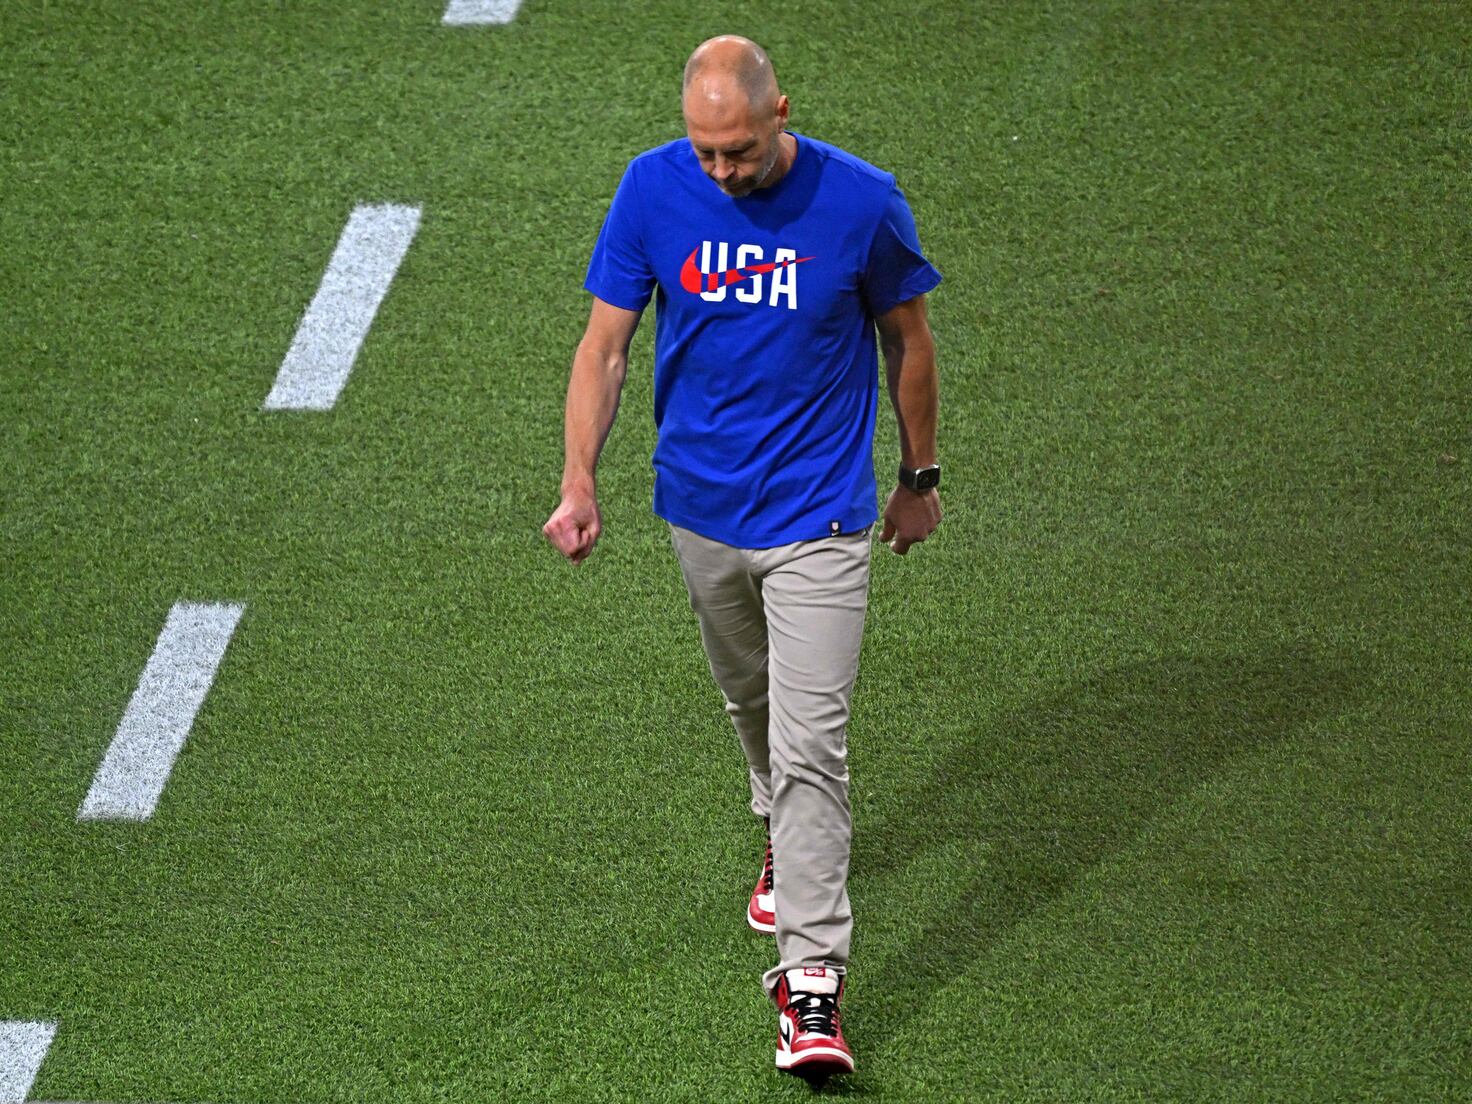 USMNT head coach Gregg Berhalter's shoe game is on point. 👏⚽️💧